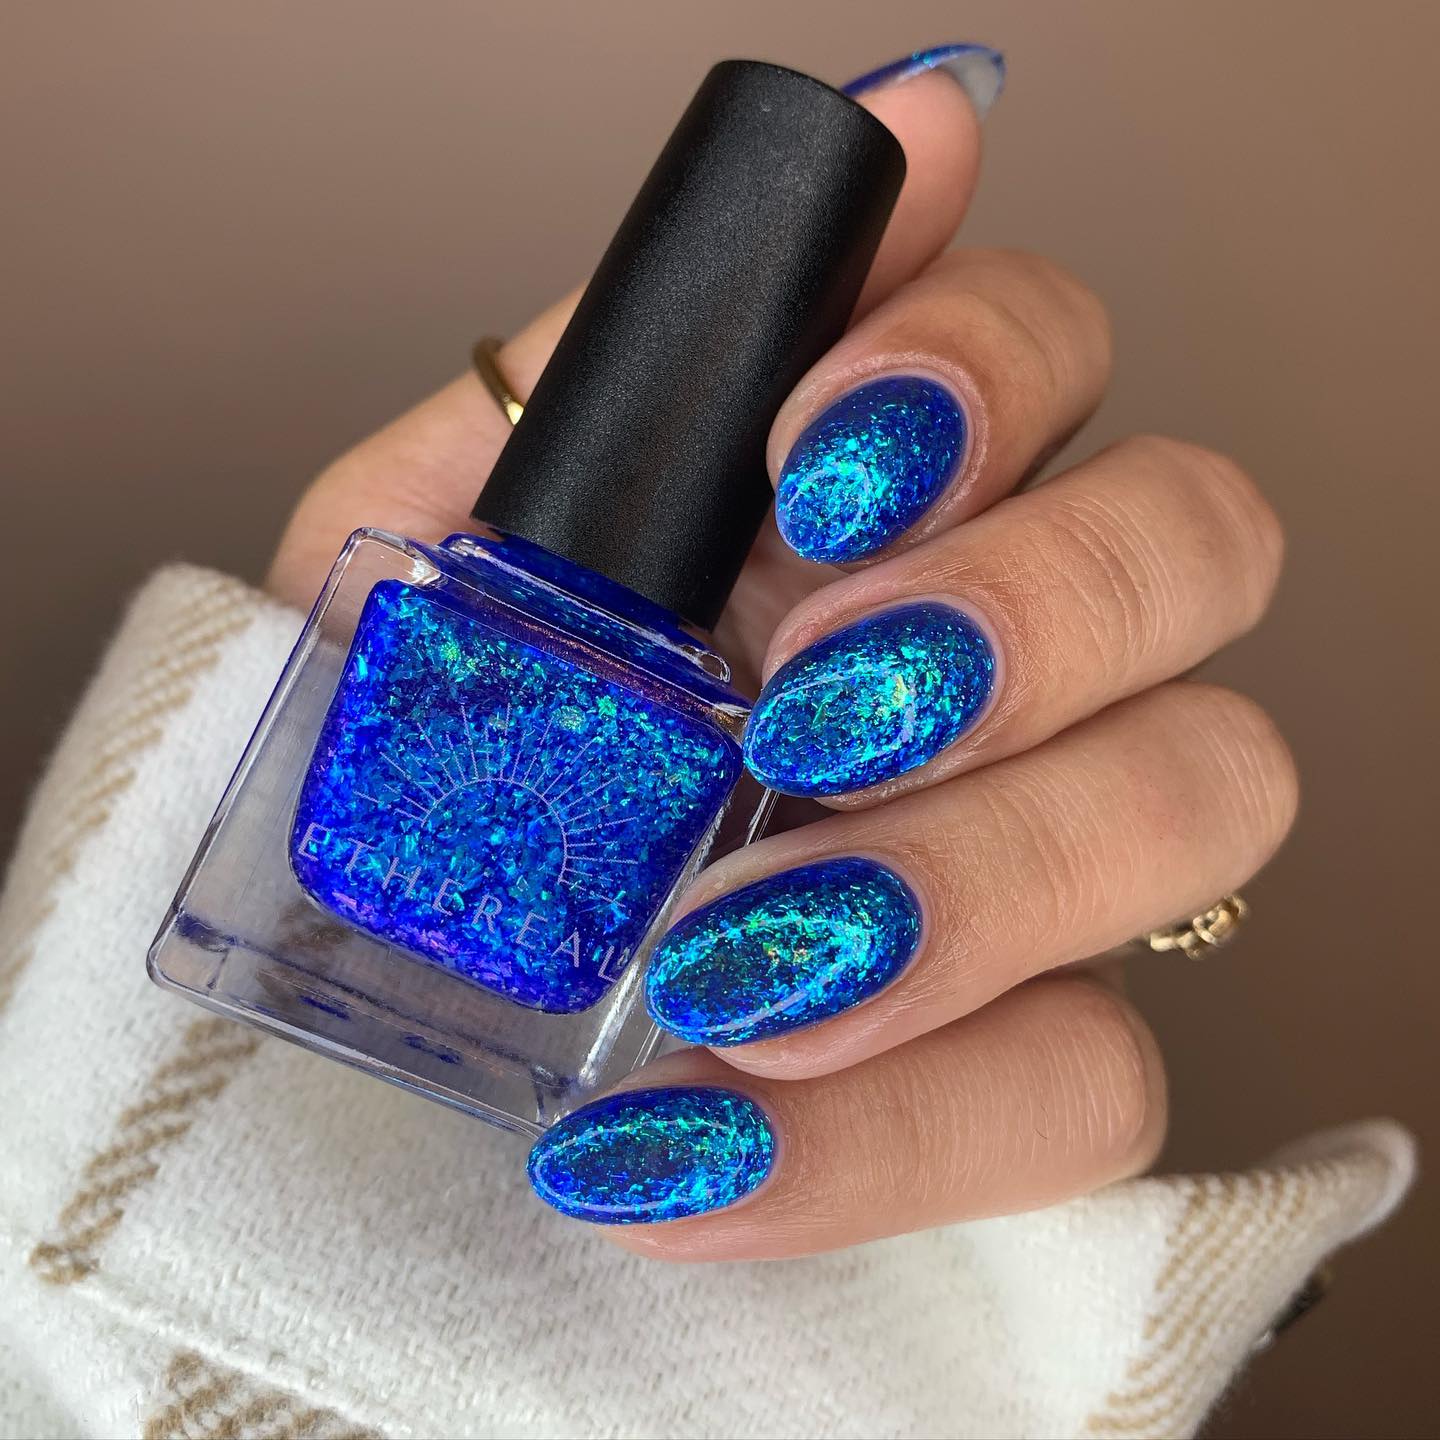 The best thing about blue glitter nails is that they can be worn with almost any outfit or makeup look. We recommend wearing them with solid colors like black or white so that they really pop!